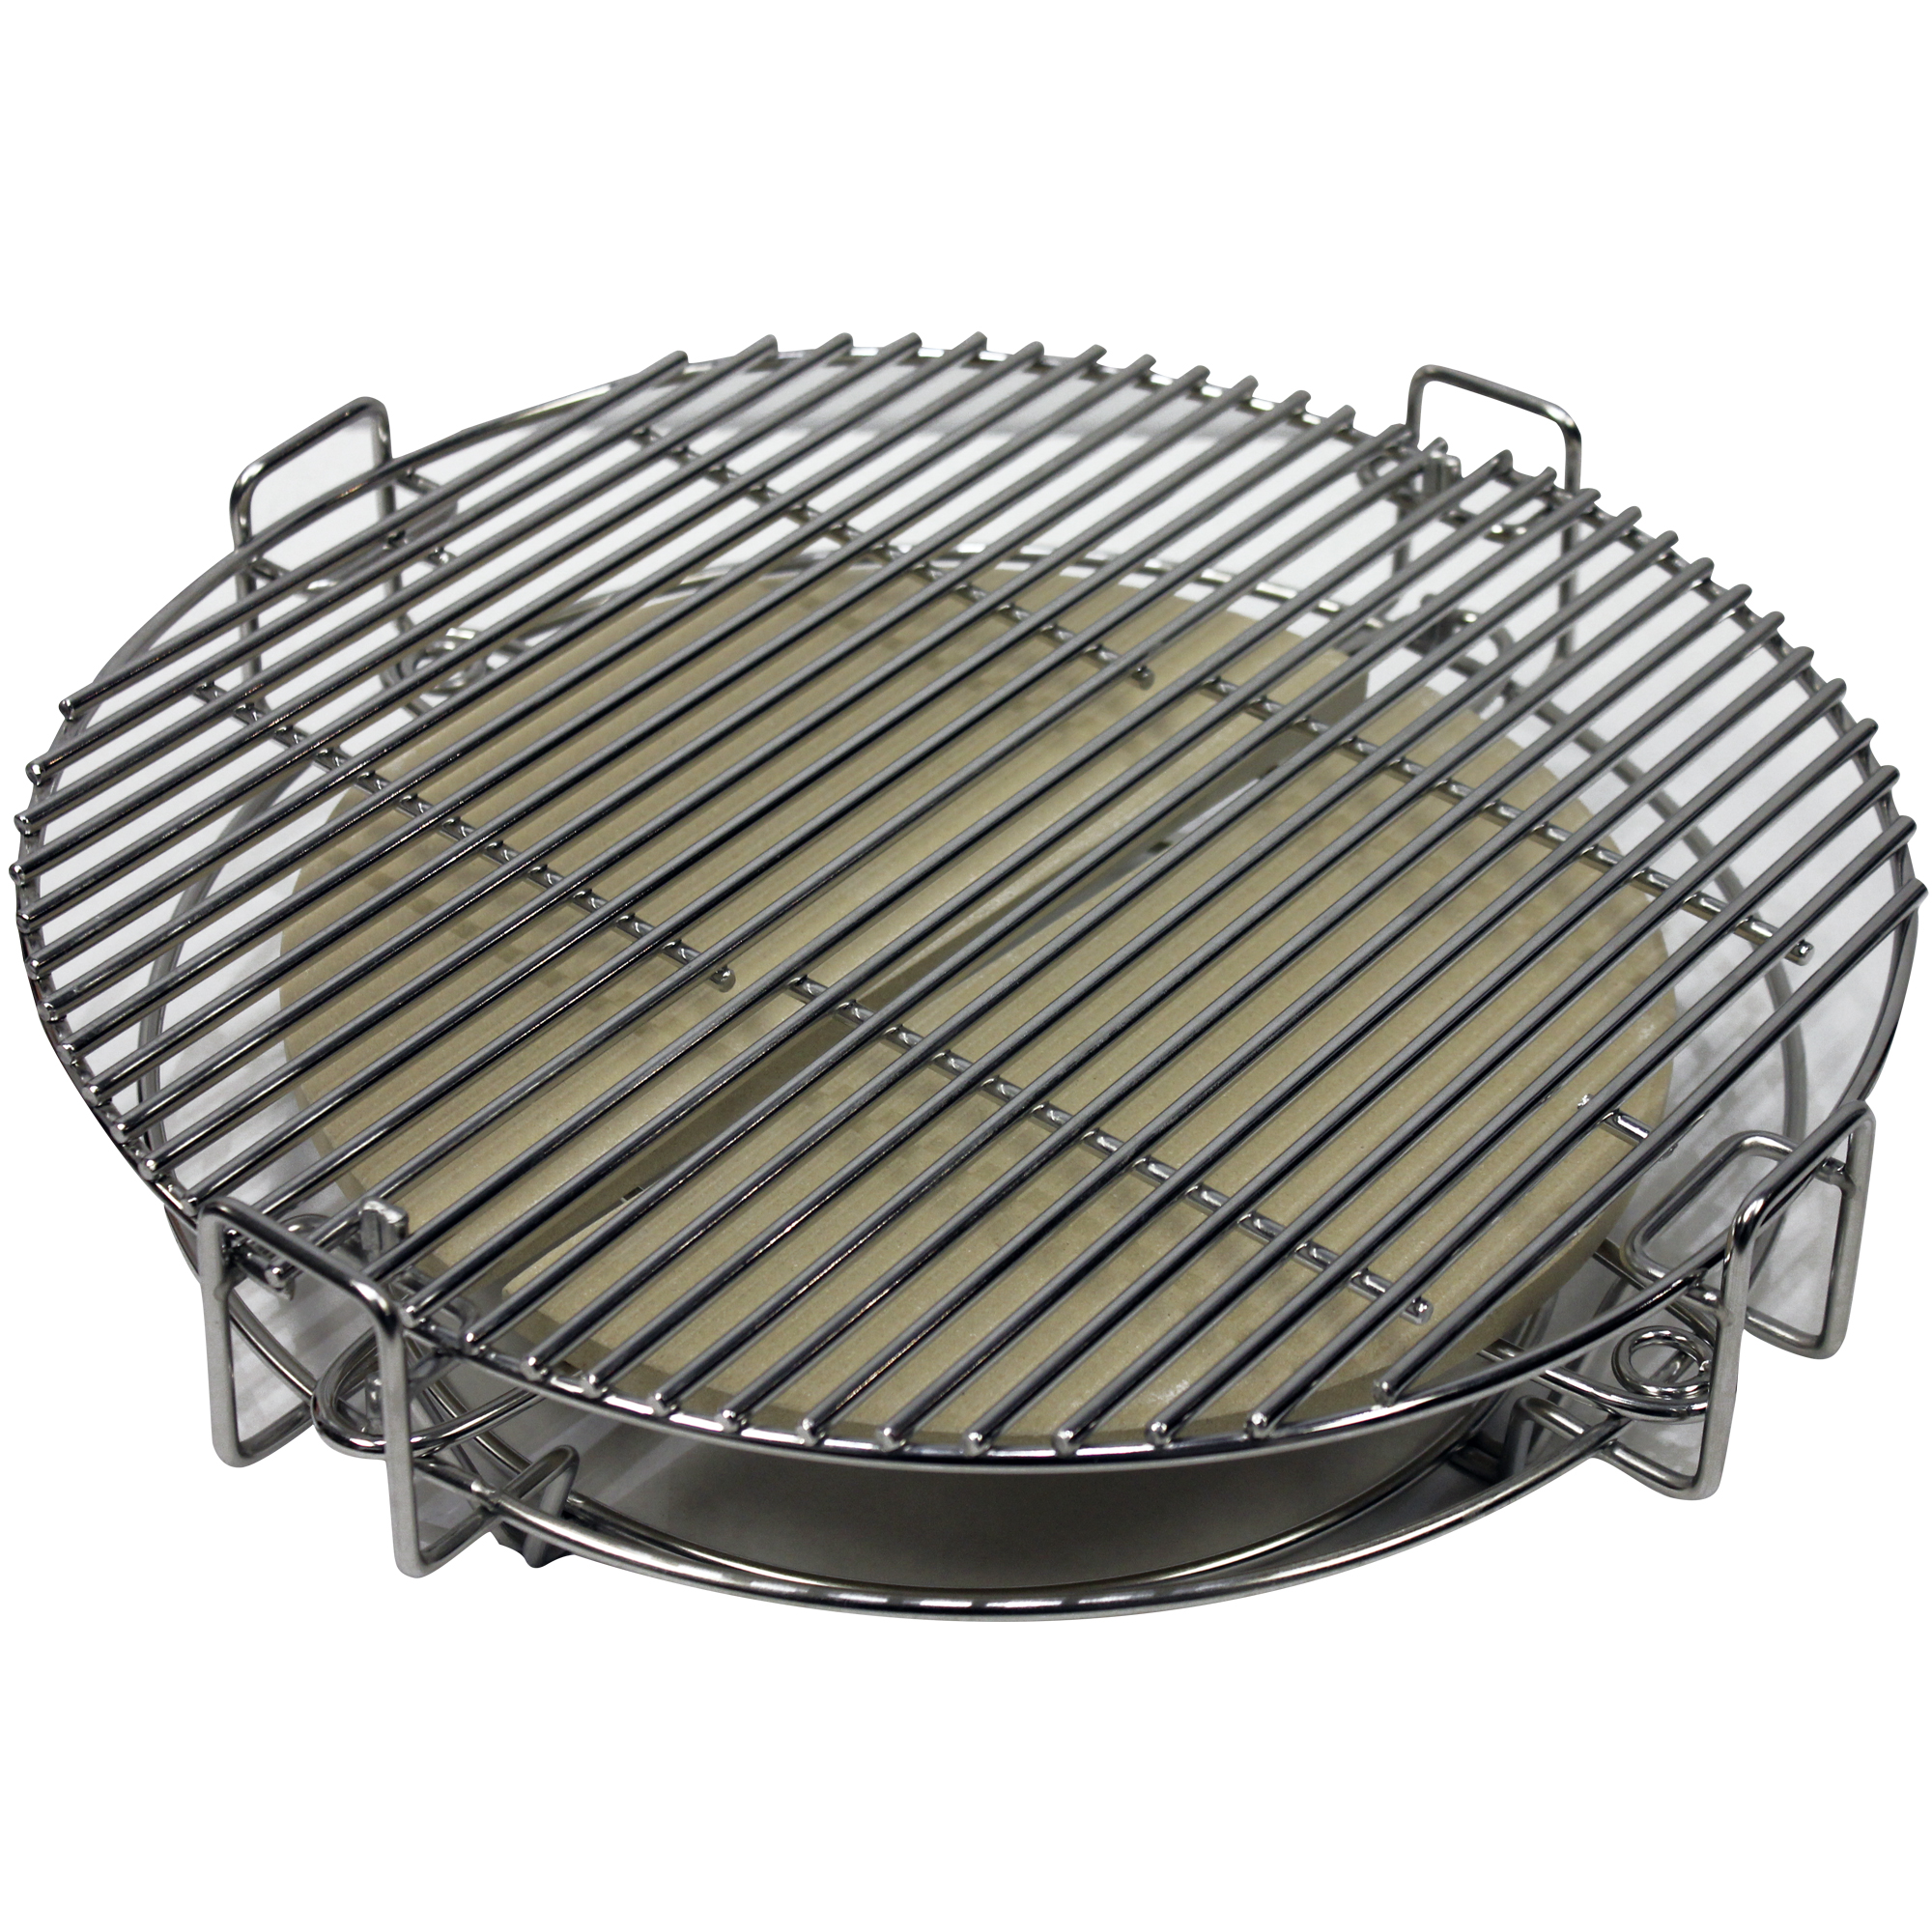 Kamado Grill - Divide Conquer Cooking System 21 inch (410-BT21)